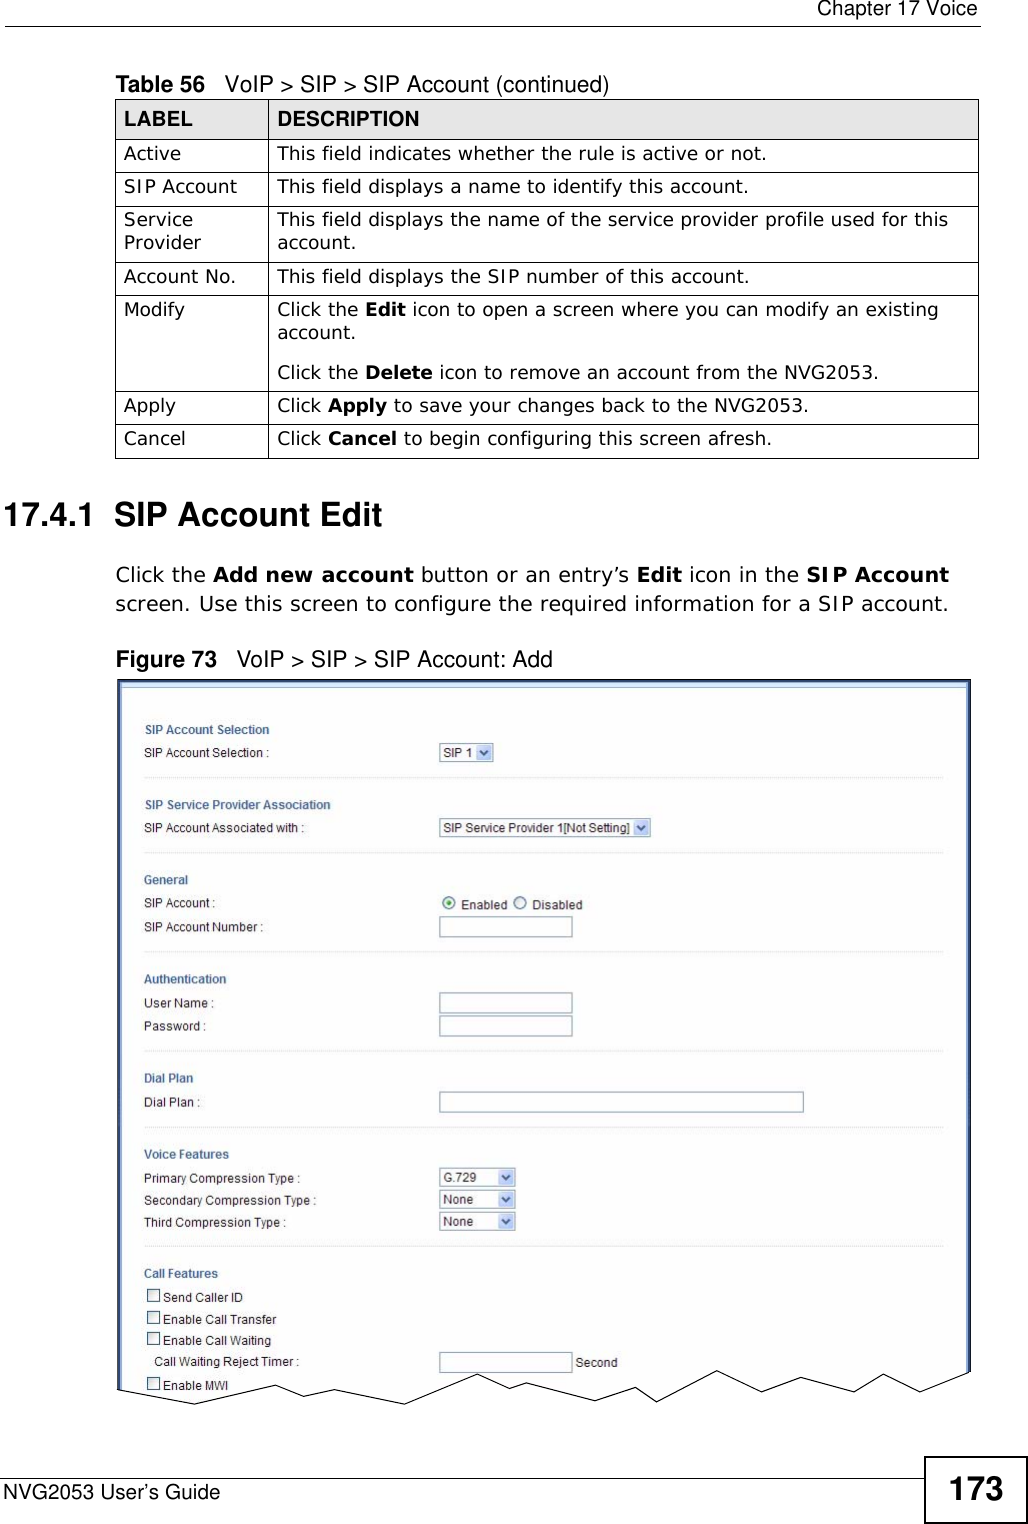  Chapter 17 VoiceNVG2053 User’s Guide 17317.4.1  SIP Account Edit   Click the Add new account button or an entry’s Edit icon in the SIP Account screen. Use this screen to configure the required information for a SIP account. Figure 73   VoIP &gt; SIP &gt; SIP Account: Add Active This field indicates whether the rule is active or not.SIP Account This field displays a name to identify this account.Service Provider This field displays the name of the service provider profile used for this account.Account No. This field displays the SIP number of this account.Modify Click the Edit icon to open a screen where you can modify an existing account. Click the Delete icon to remove an account from the NVG2053.Apply Click Apply to save your changes back to the NVG2053.Cancel Click Cancel to begin configuring this screen afresh.Table 56   VoIP &gt; SIP &gt; SIP Account (continued)LABEL DESCRIPTION